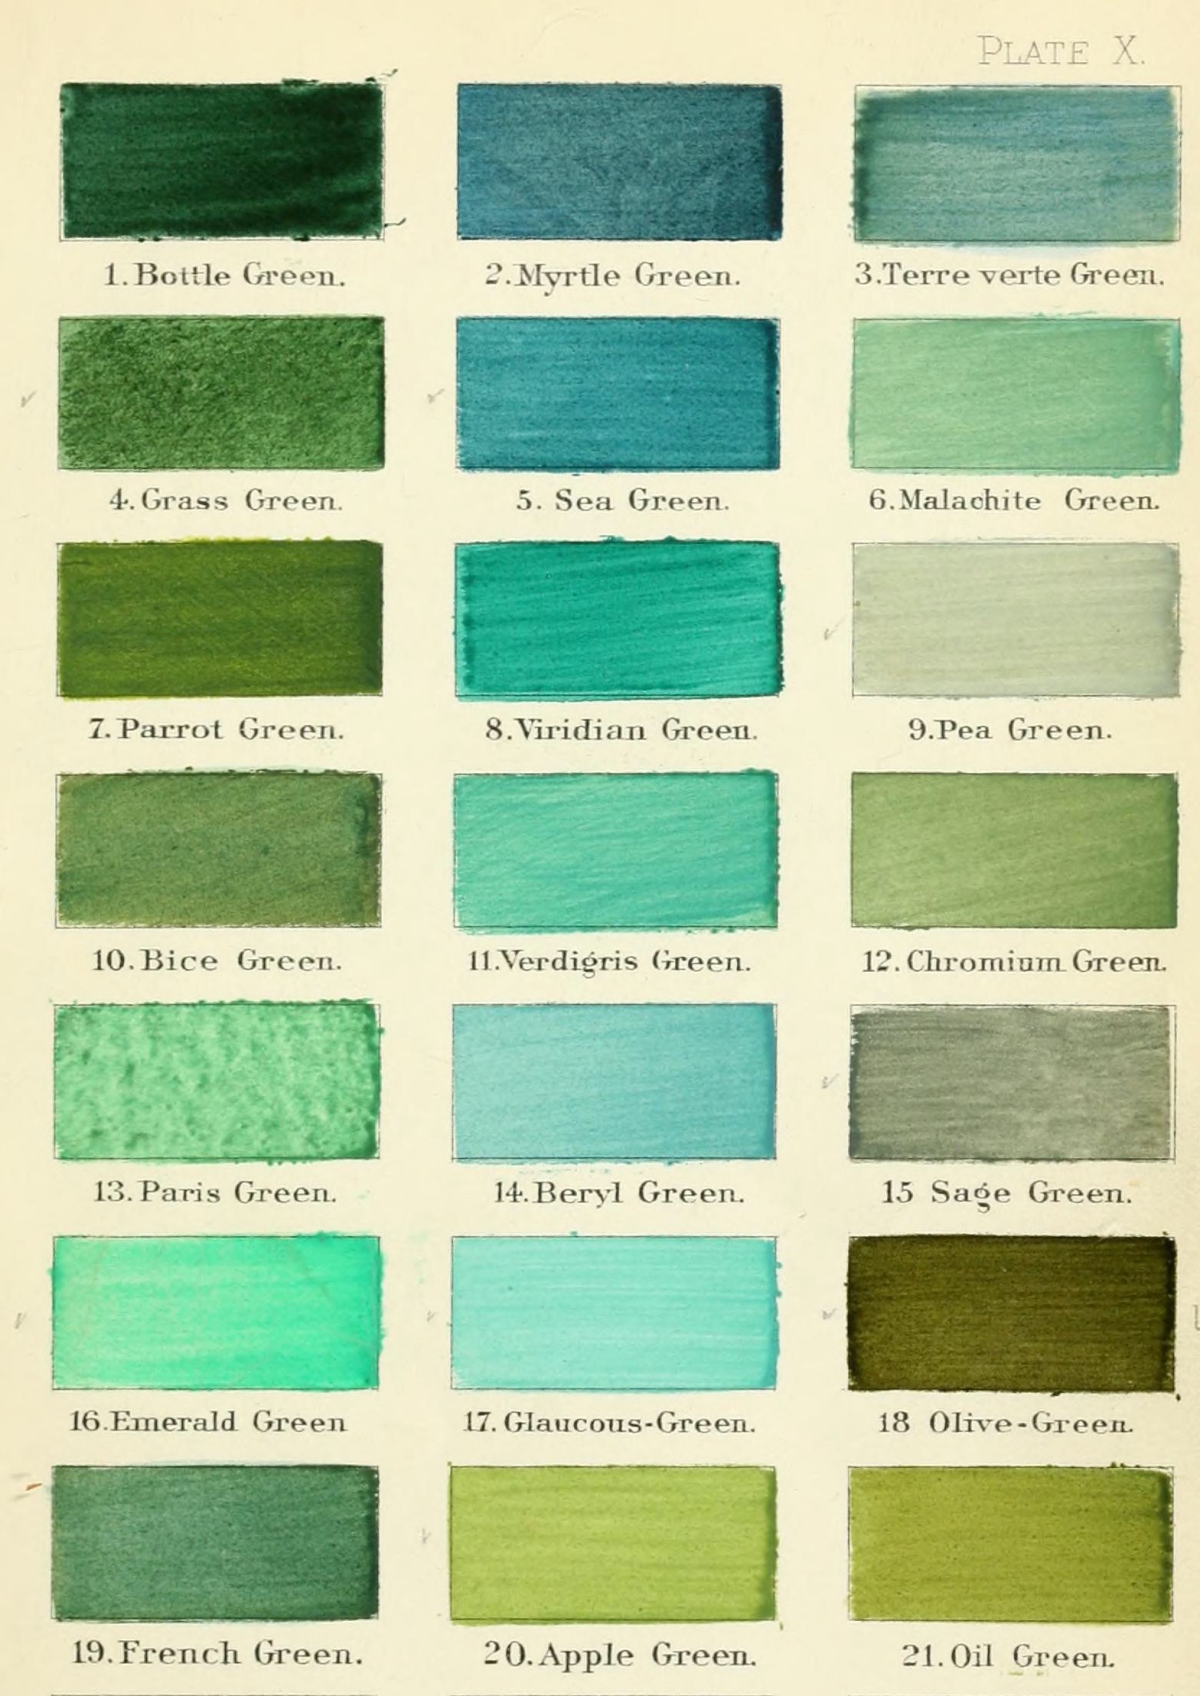 1886 color chart showing different greens